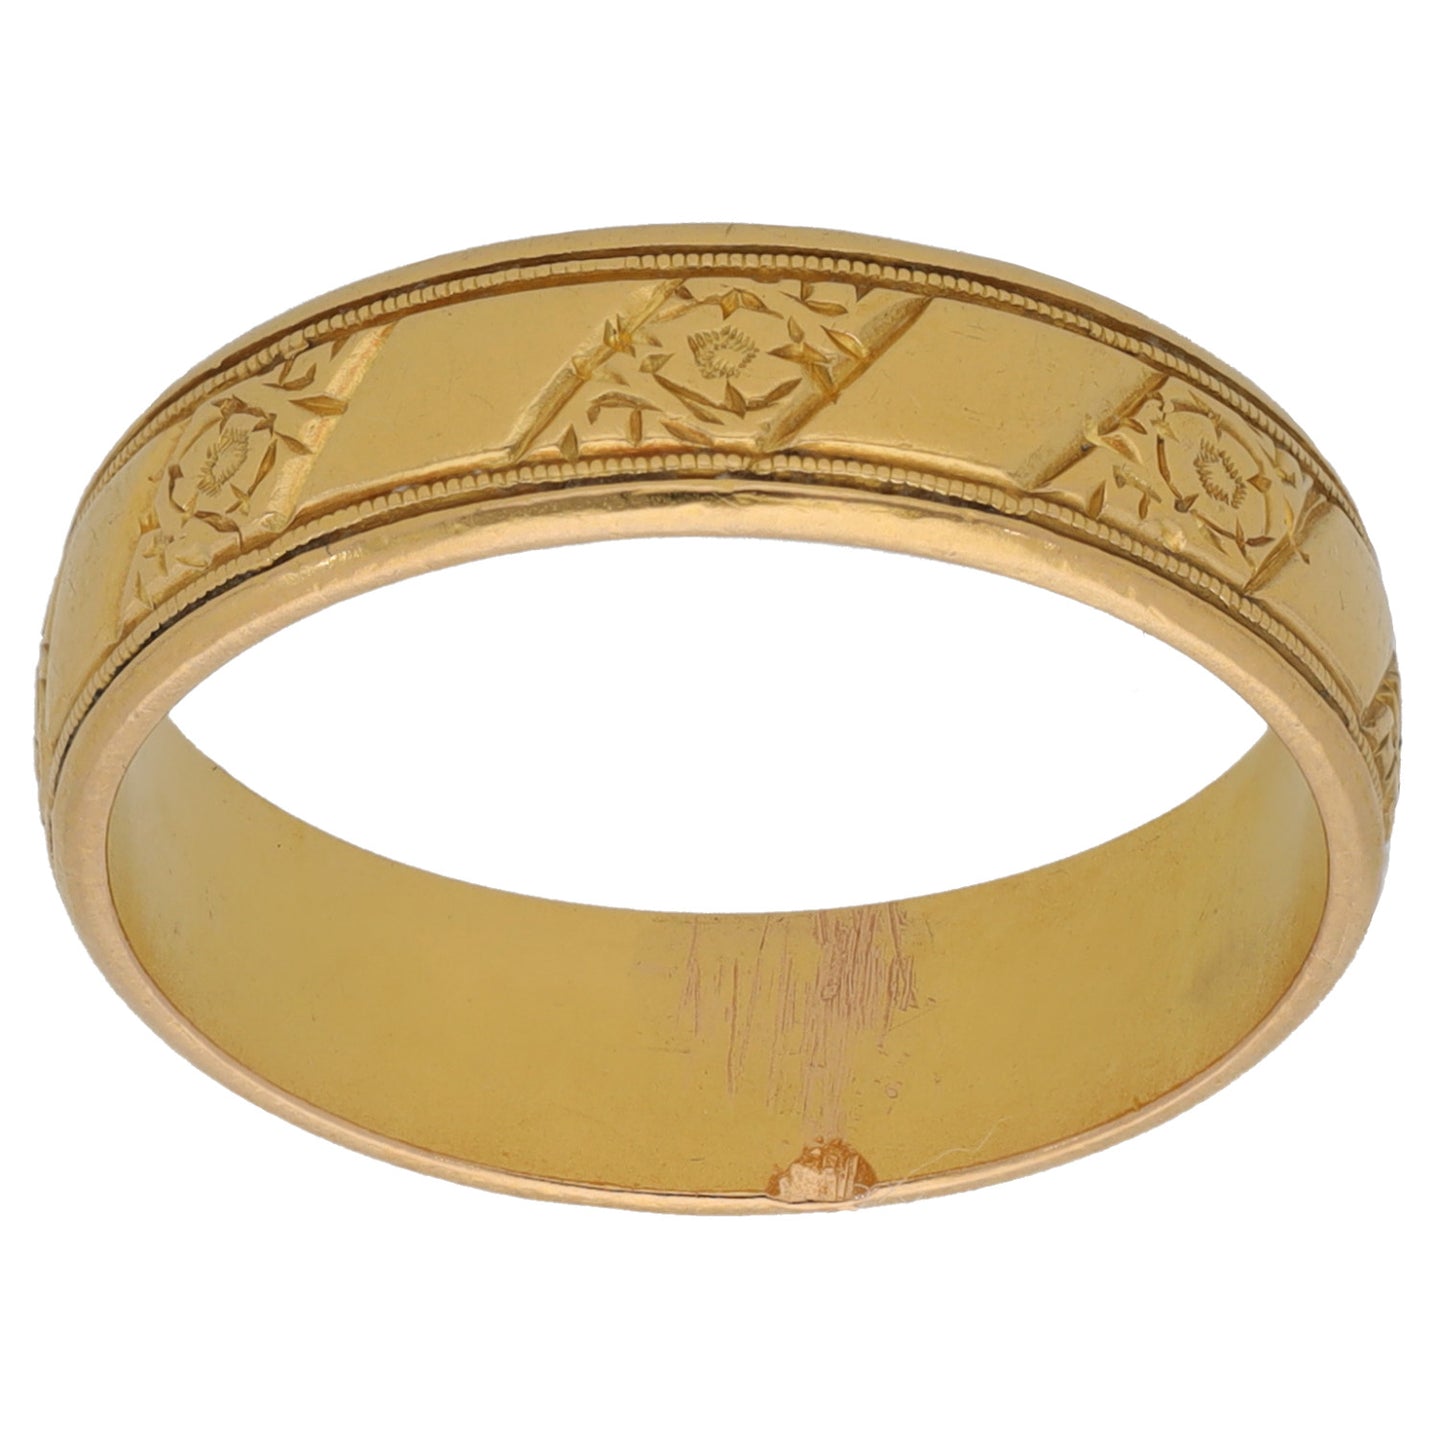 22ct Gold Patterned Wedding Ring Size P